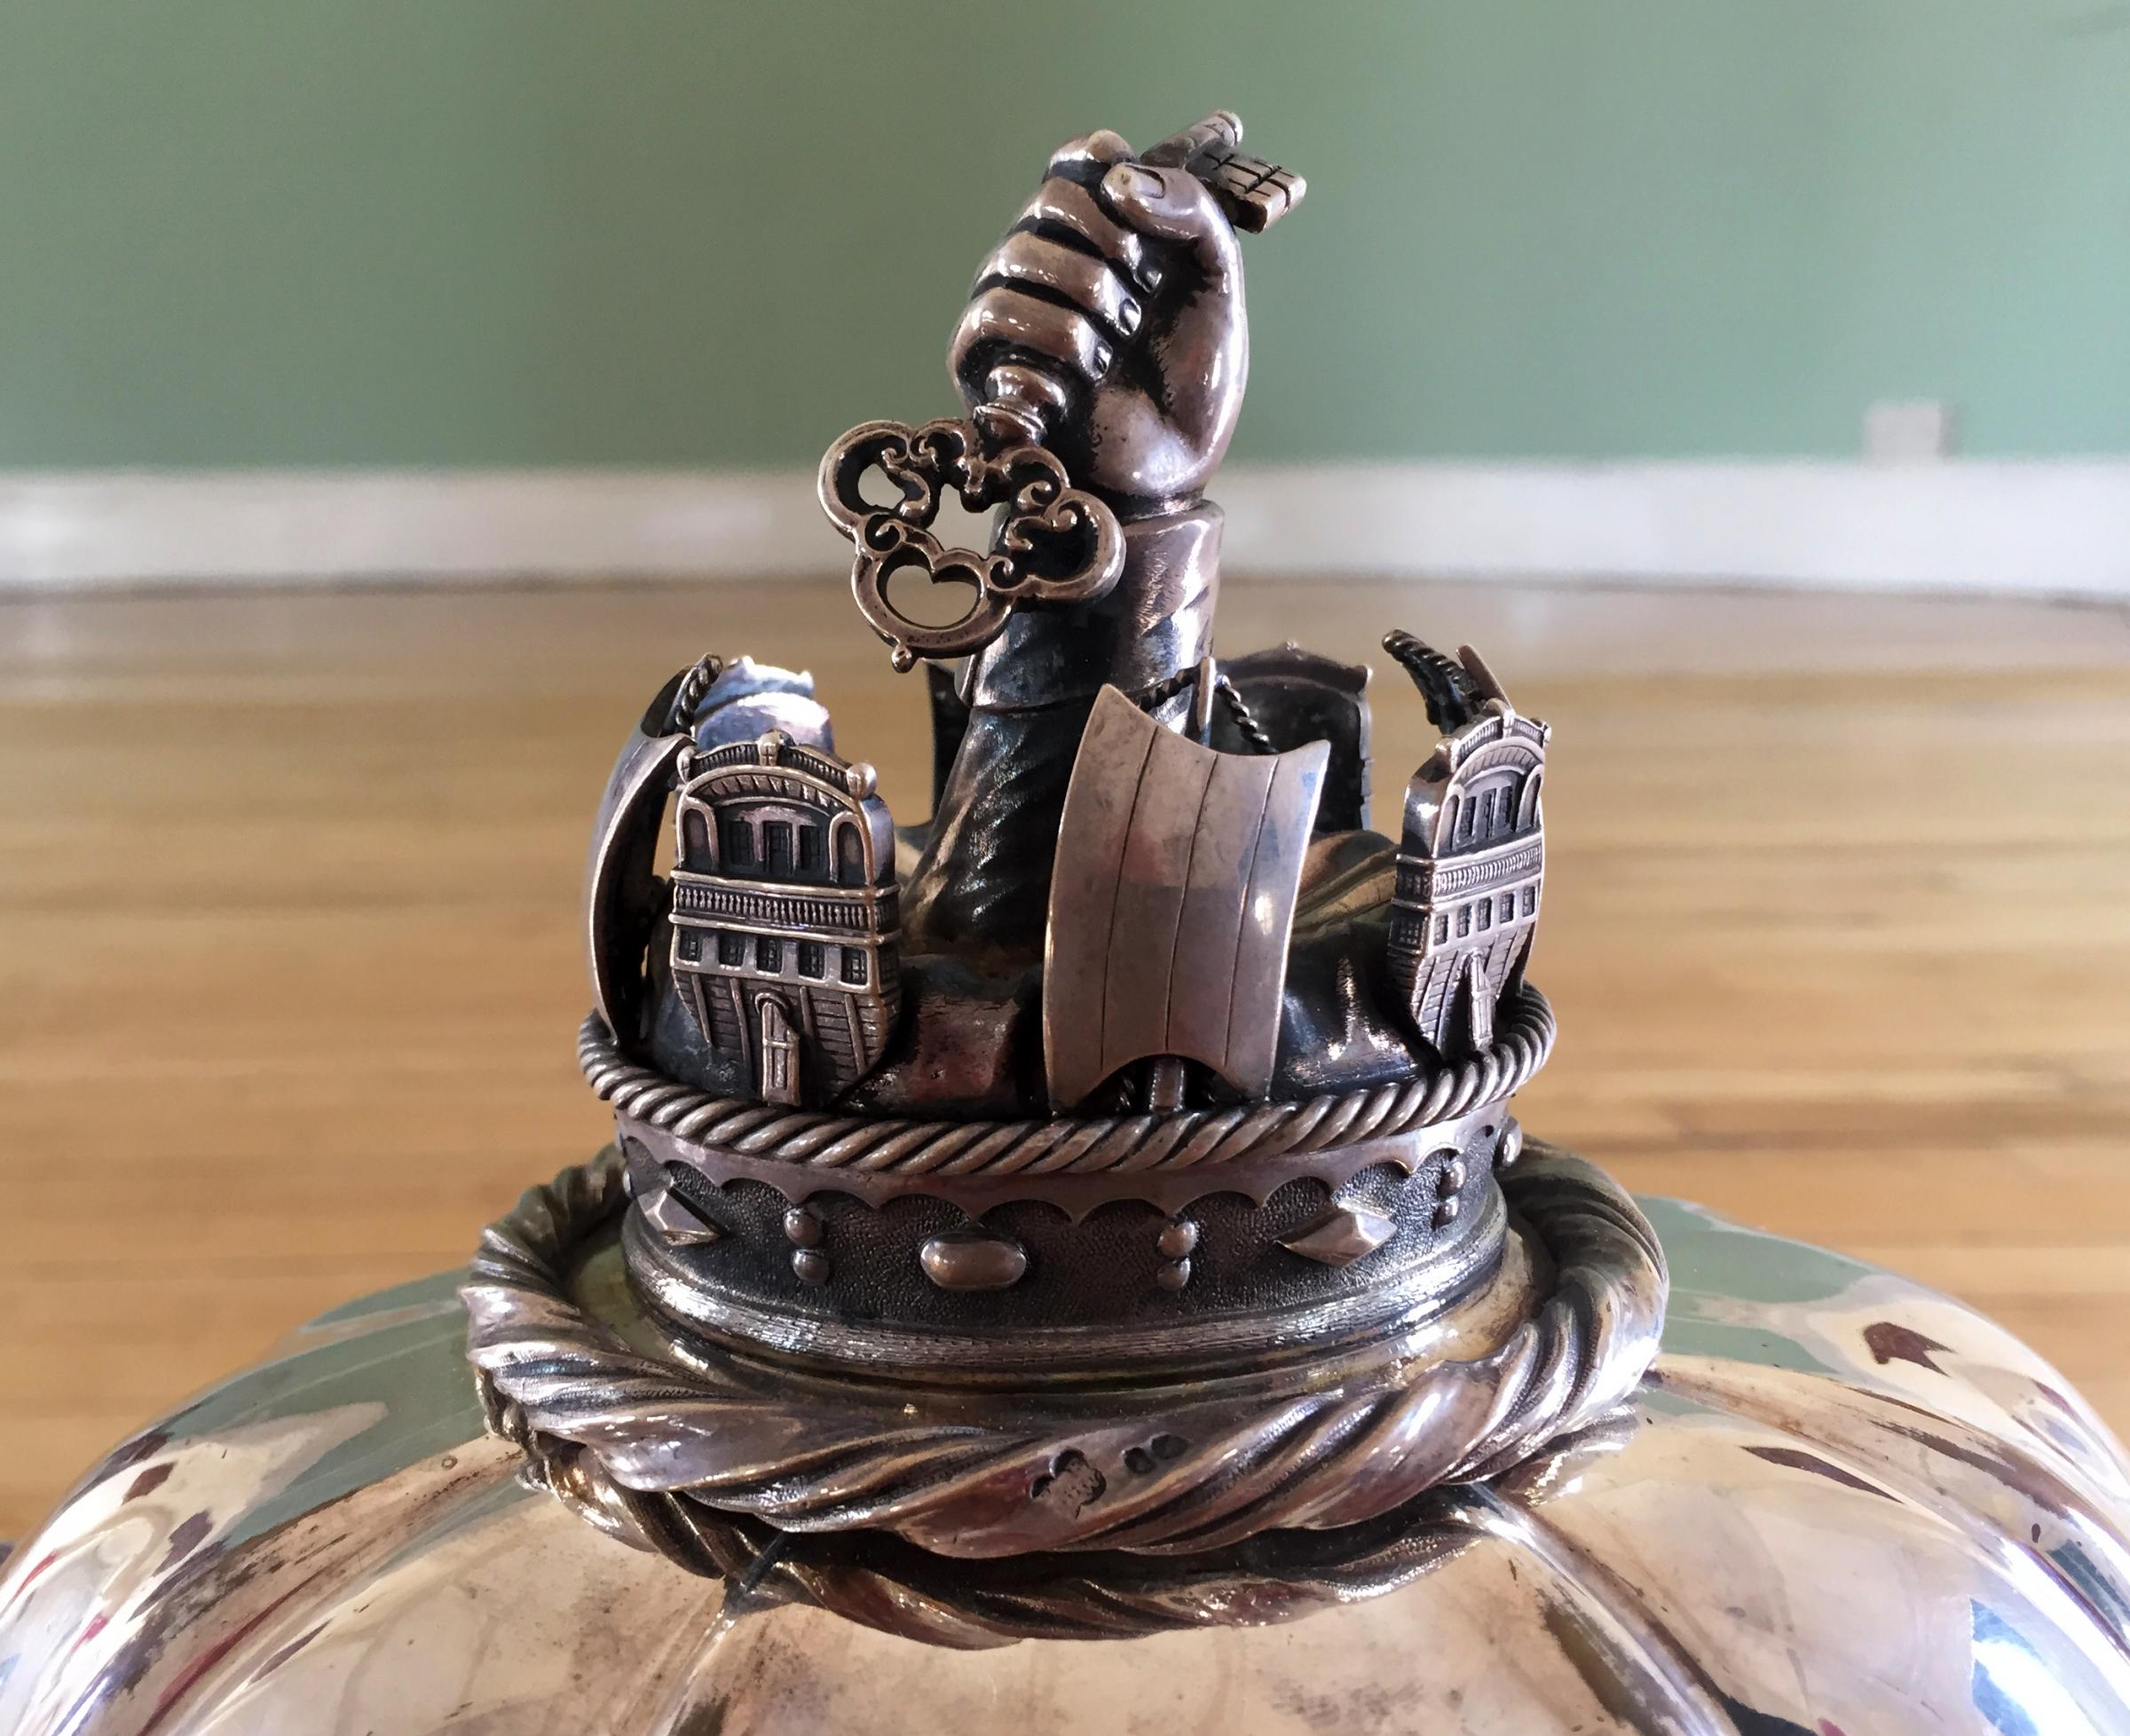 A hand holding a gilded key - a little bent over time - on top of the tureen. It symbolises how Capt Boss opened up Northallerton to democracy